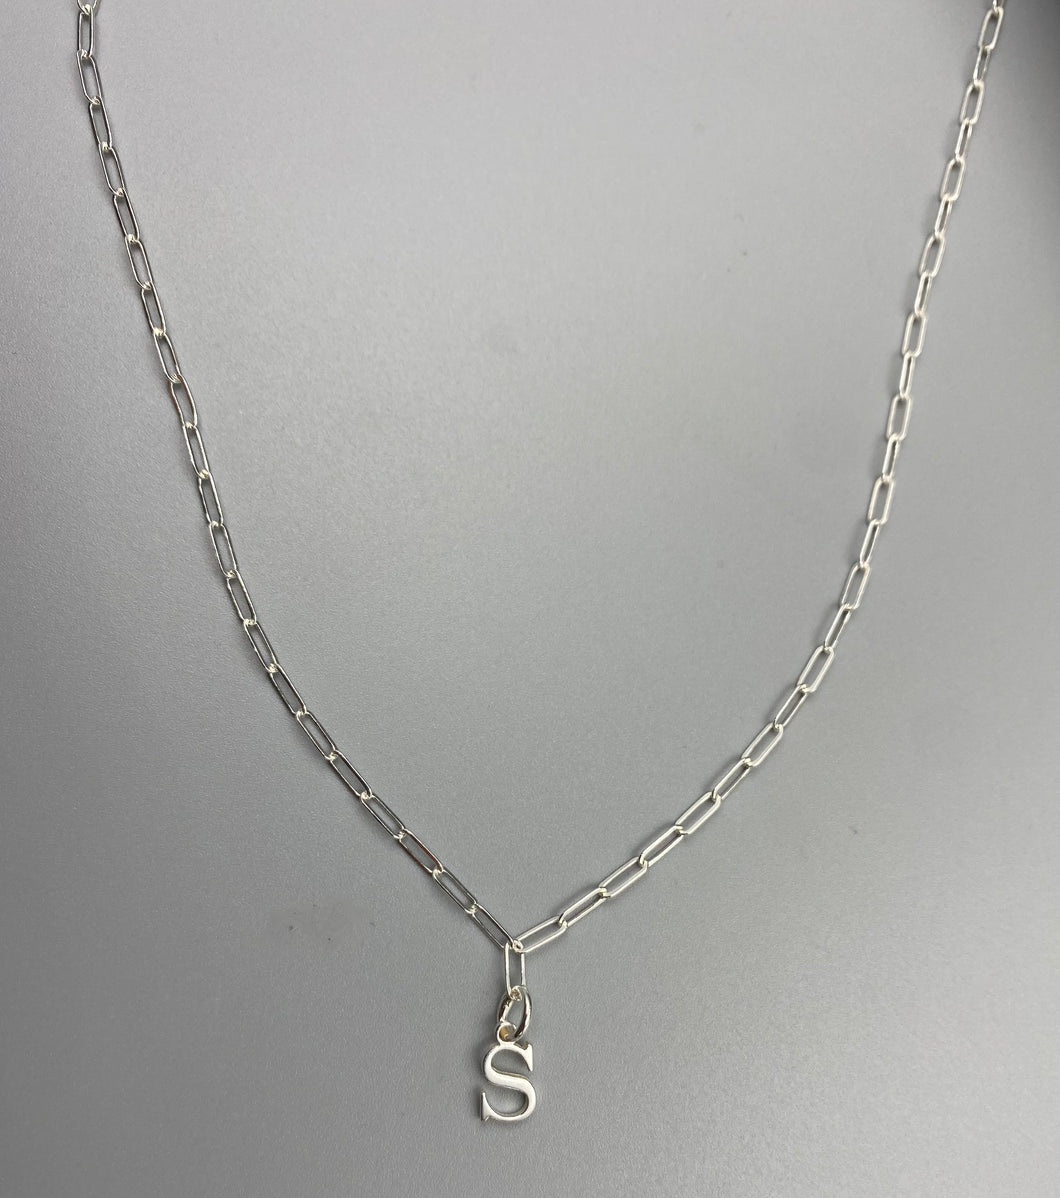 Personalised Alphabet charm skinny trace chain necklace in Sterling Silver